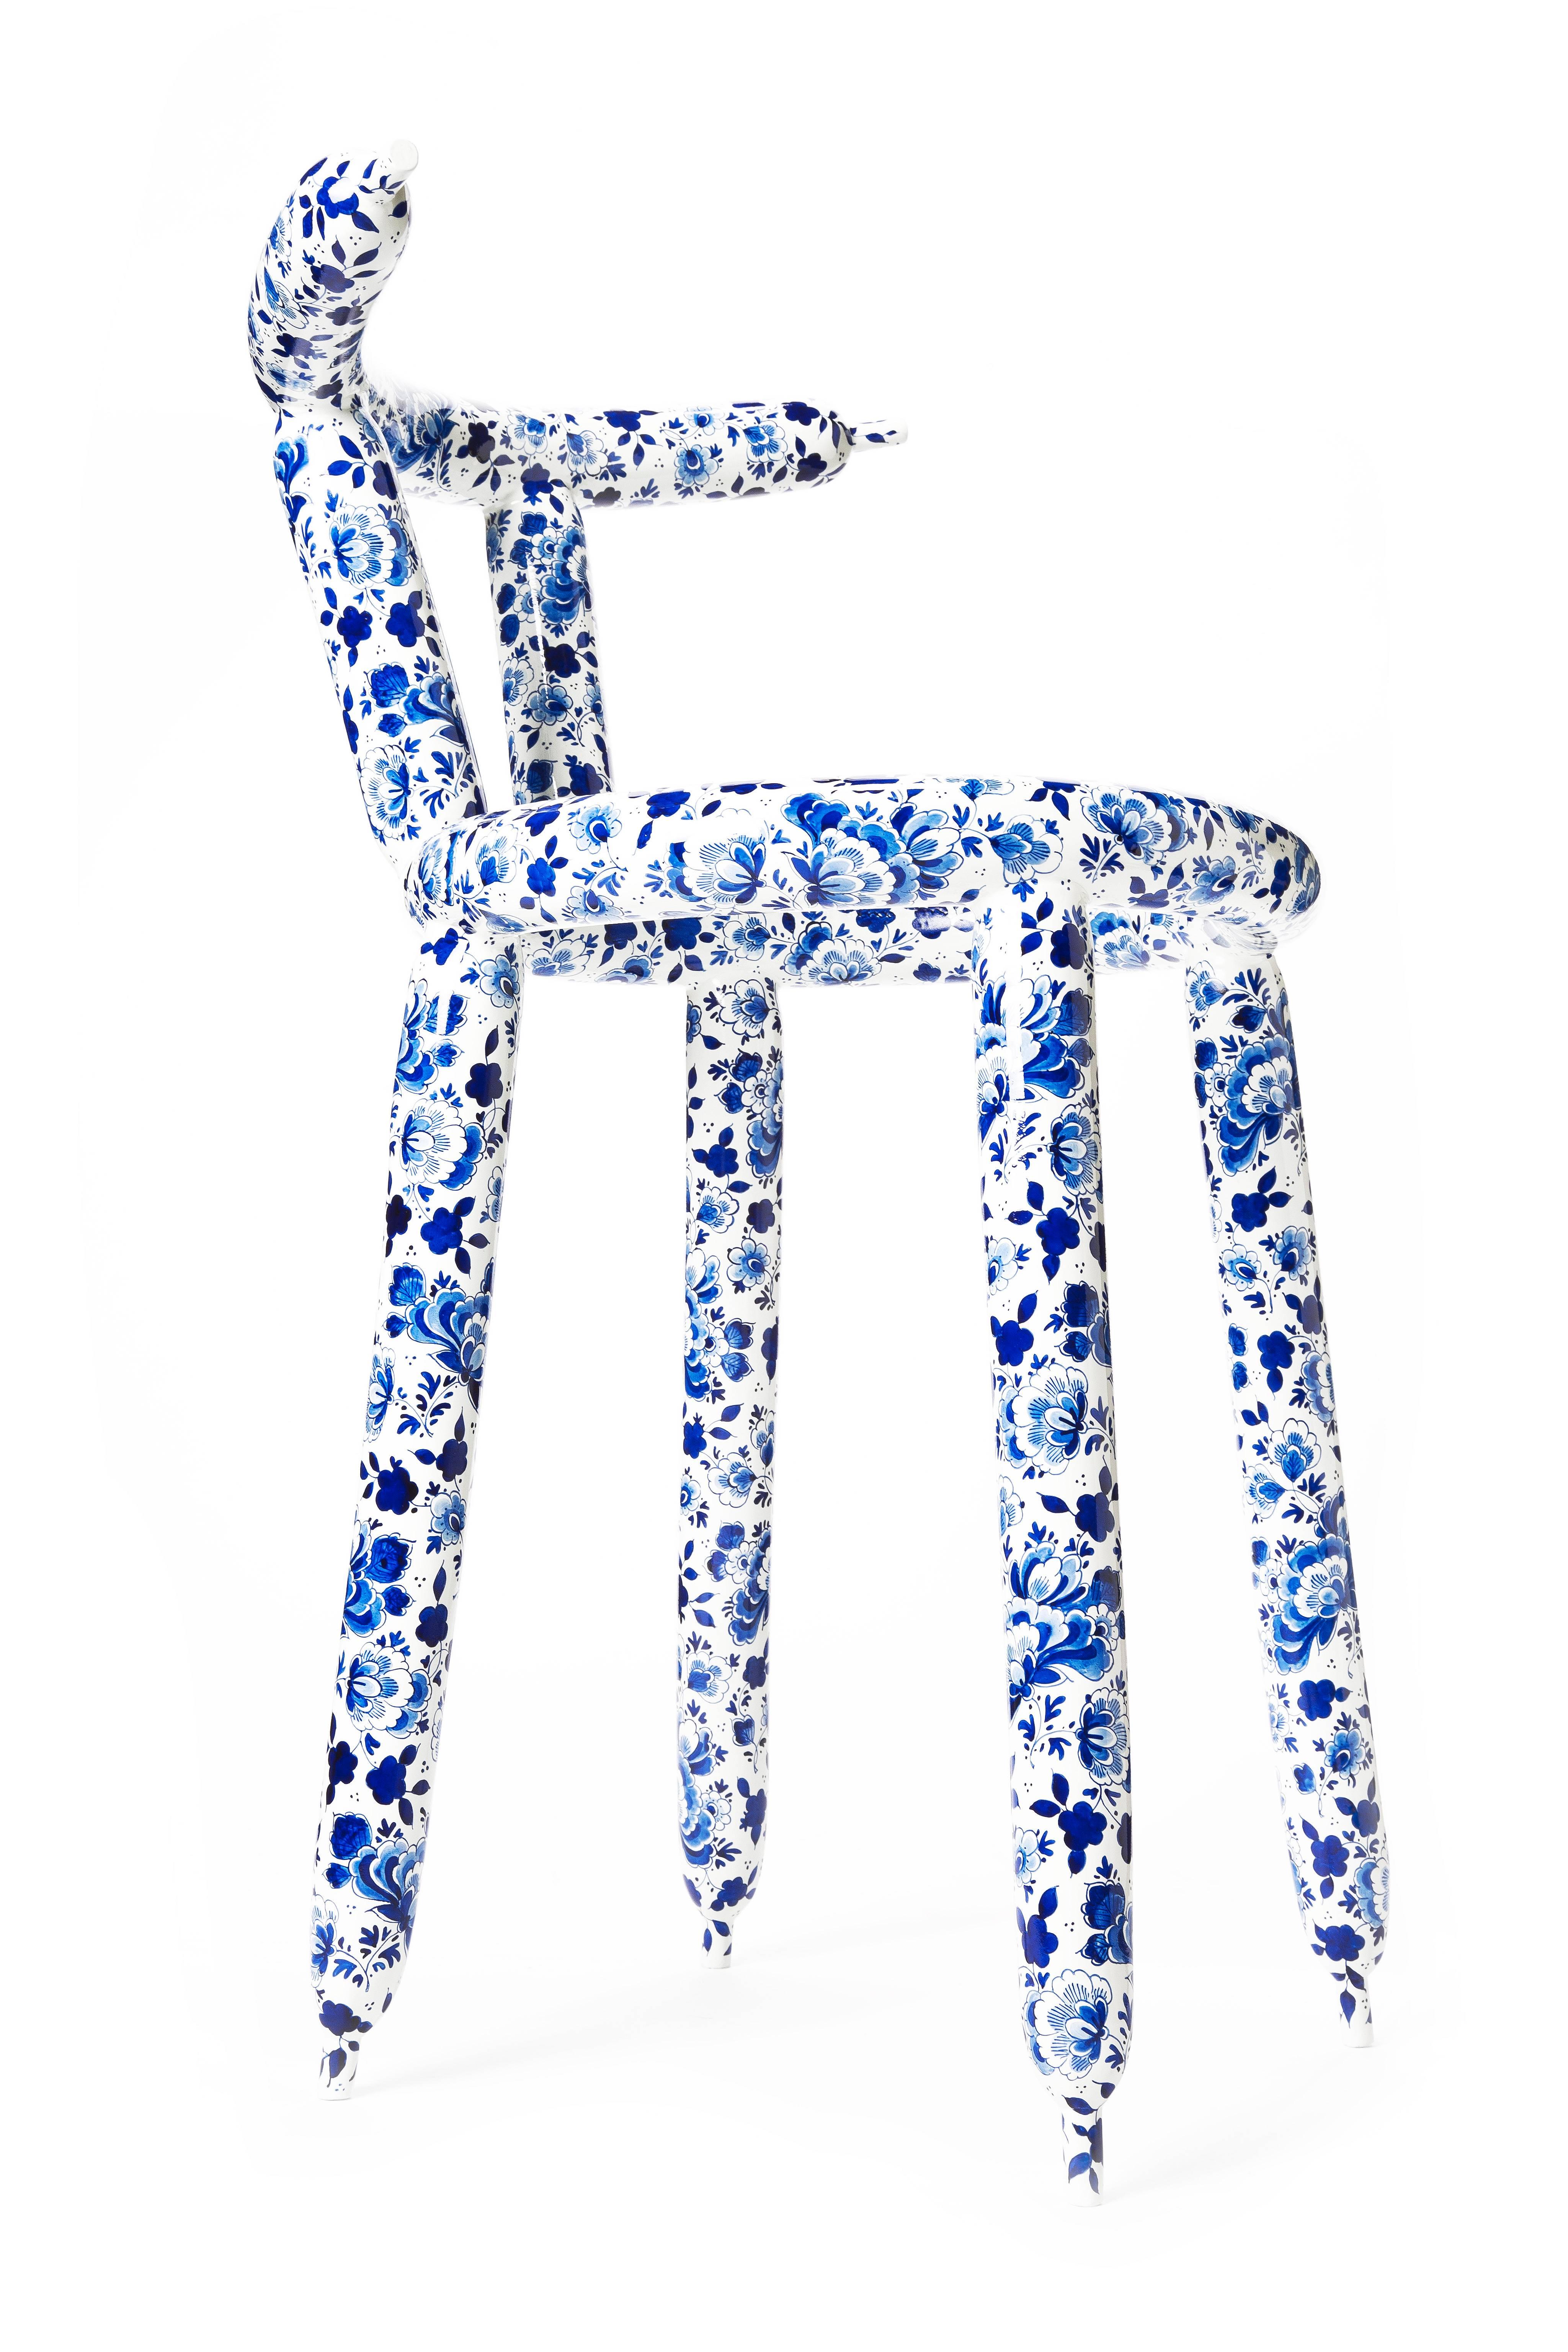 Delft Blue Carbon Chair by Marcel Wanders In Excellent Condition For Sale In Munich, Bavaria